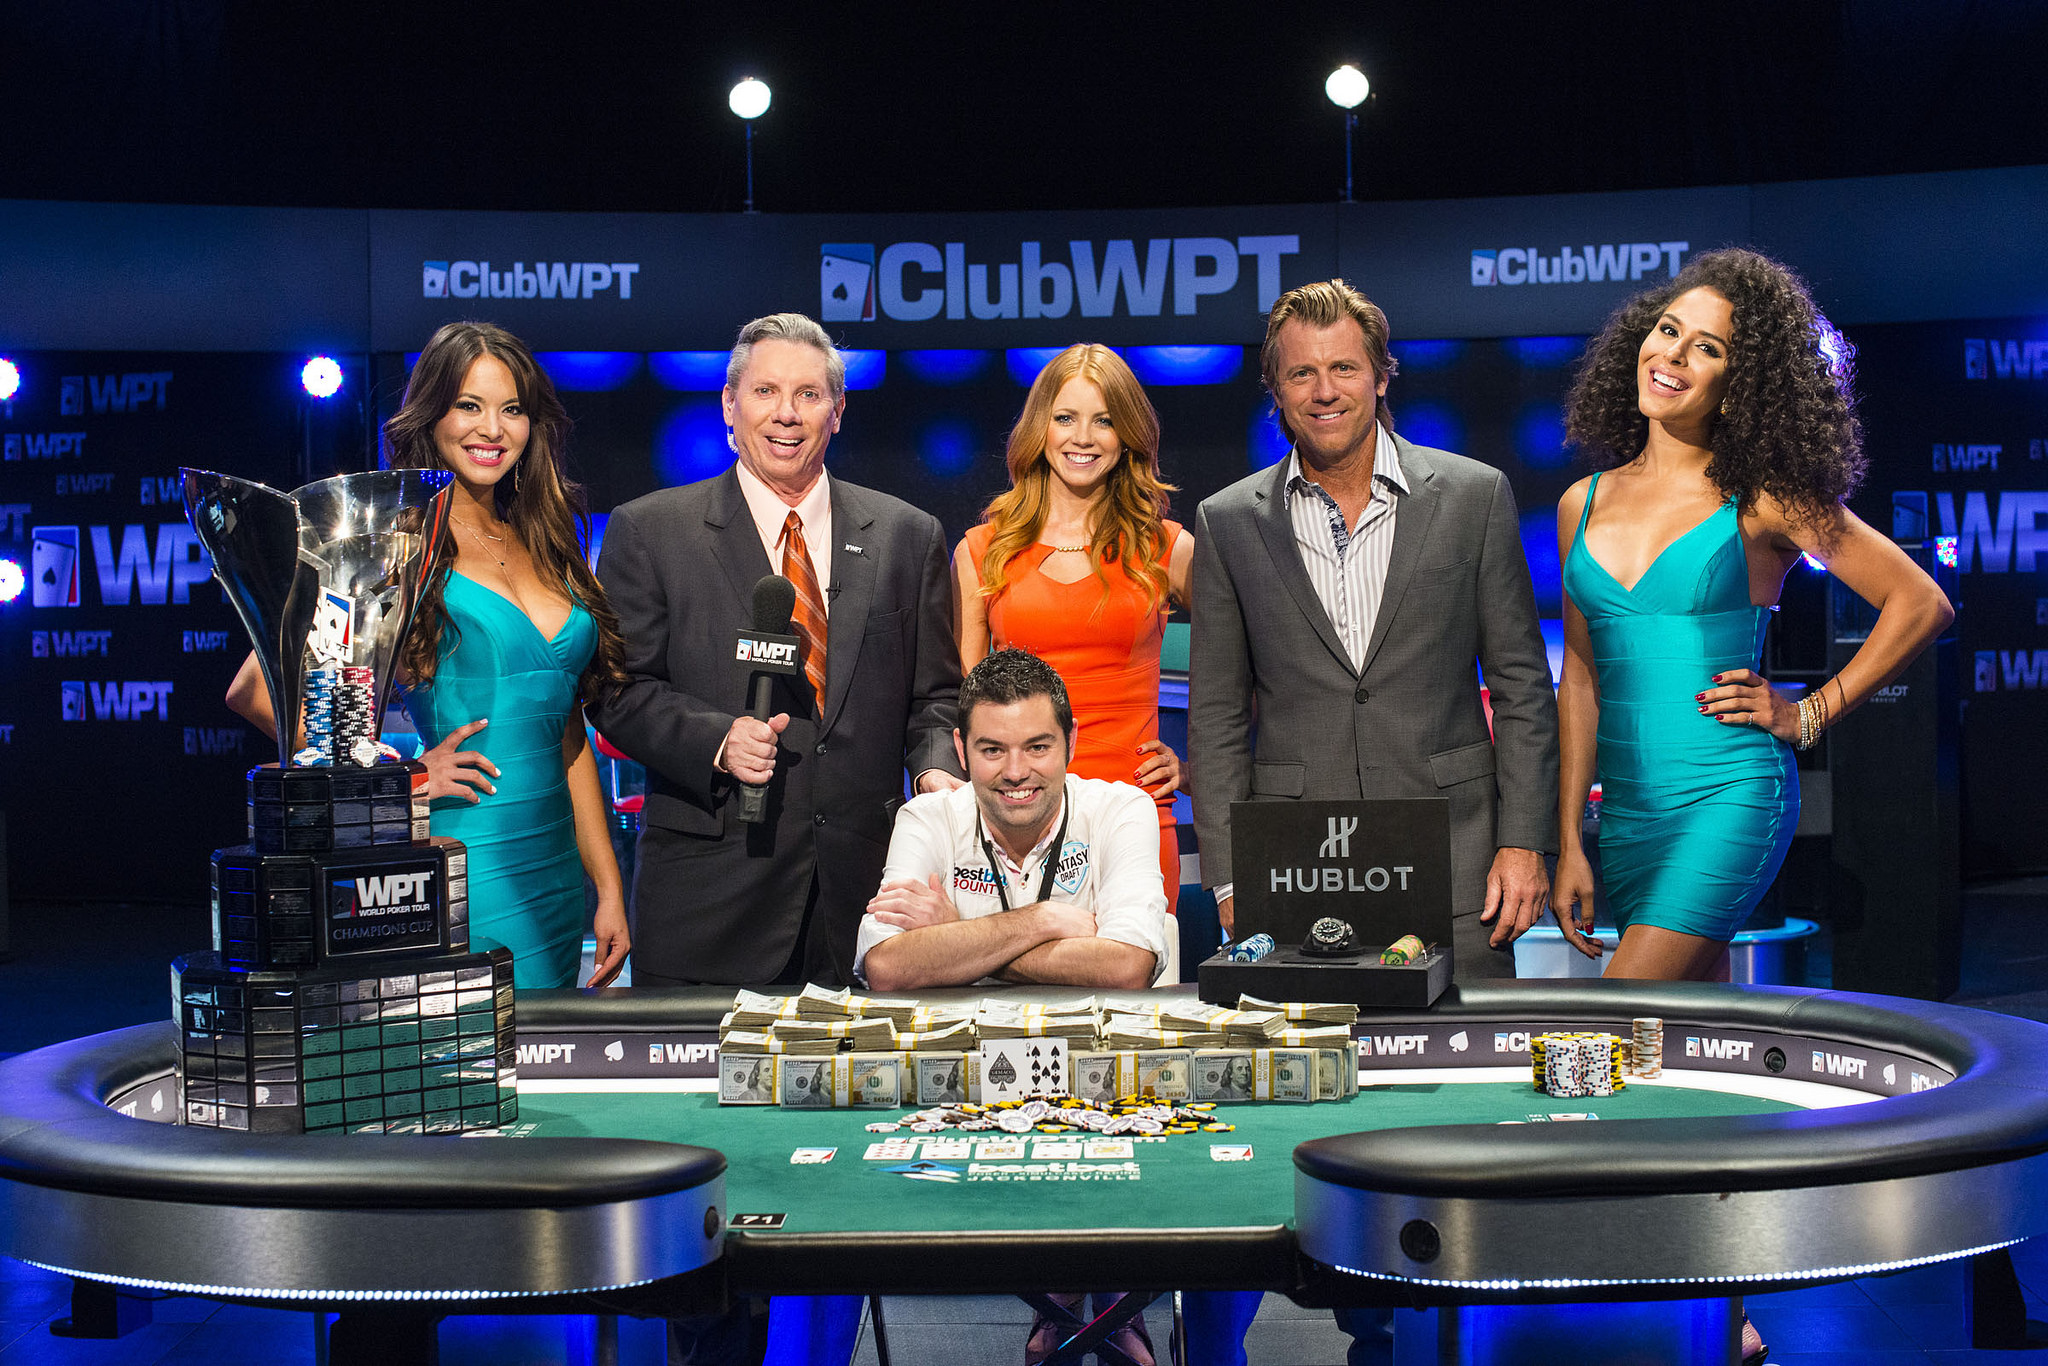 WPT Tournament of Champions Features $100,000 Overlay and 30-Second Shot Clock